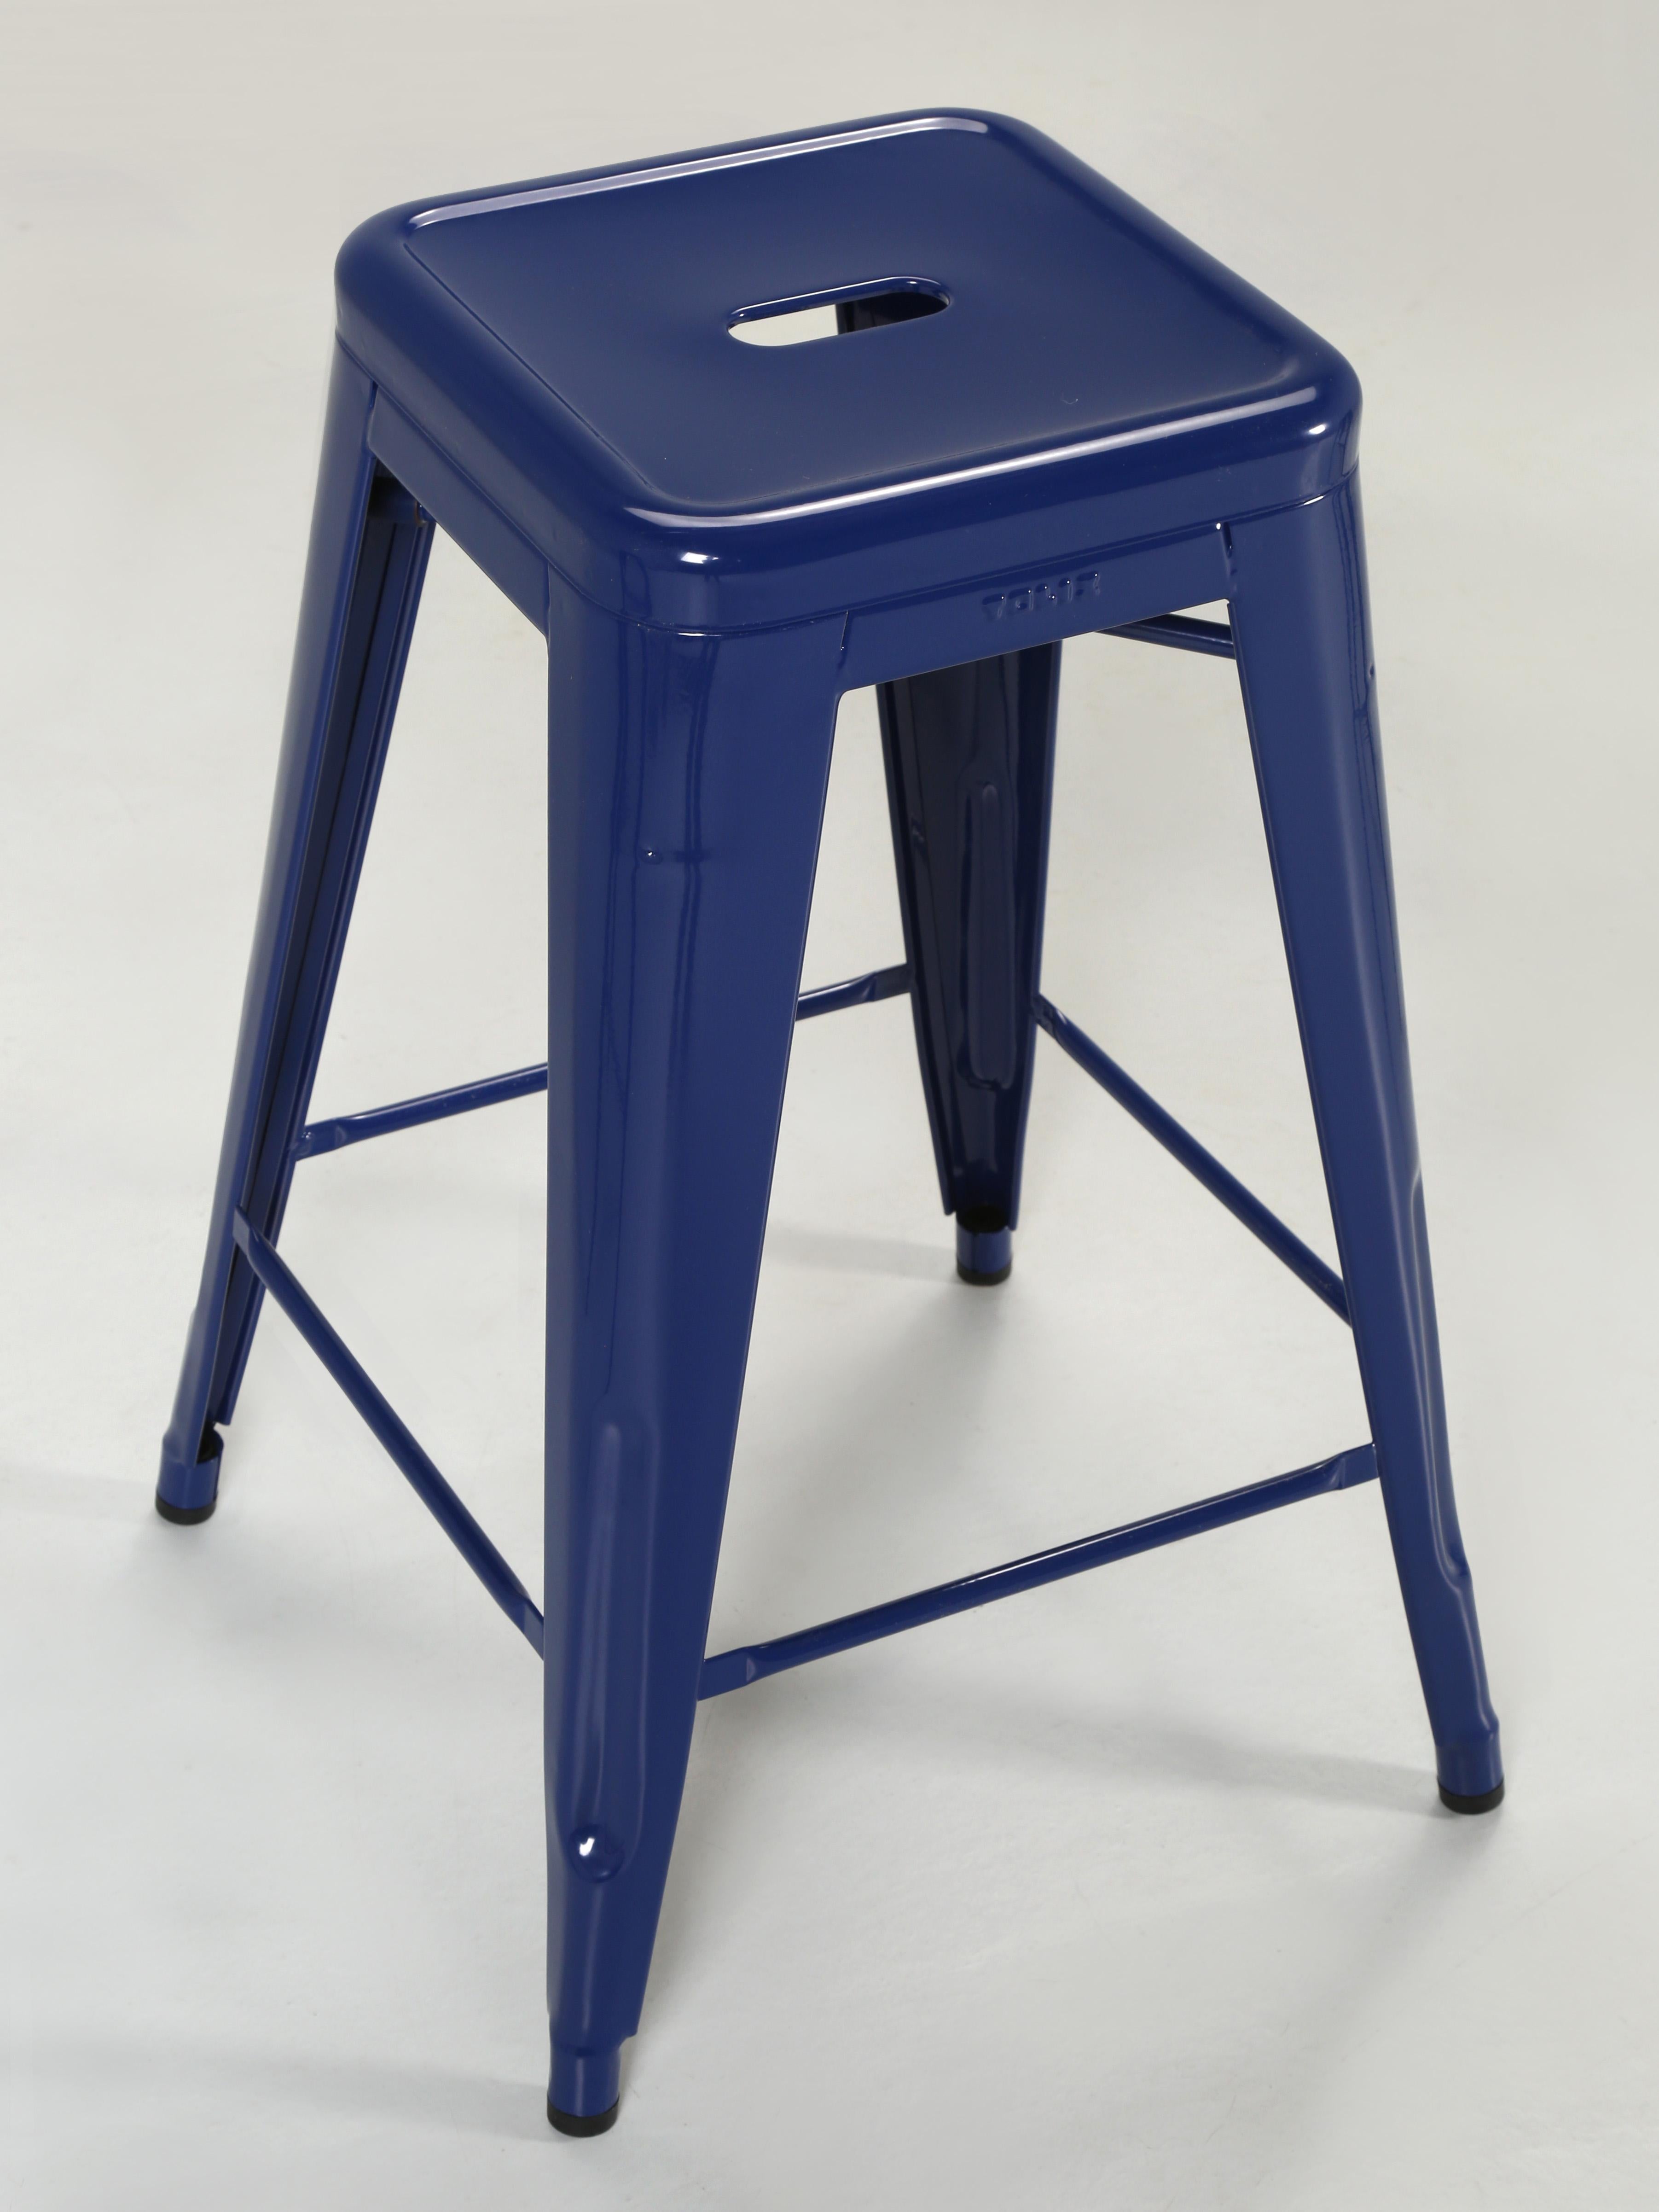 Set of '3' genuine hand-made Tolix kitchen counter stools in dark blue. The Tolix kitchen counter stools are considered an iconic design and their matching chairs (also in stock), and have been displayed in the New York Museum of Modern Art,